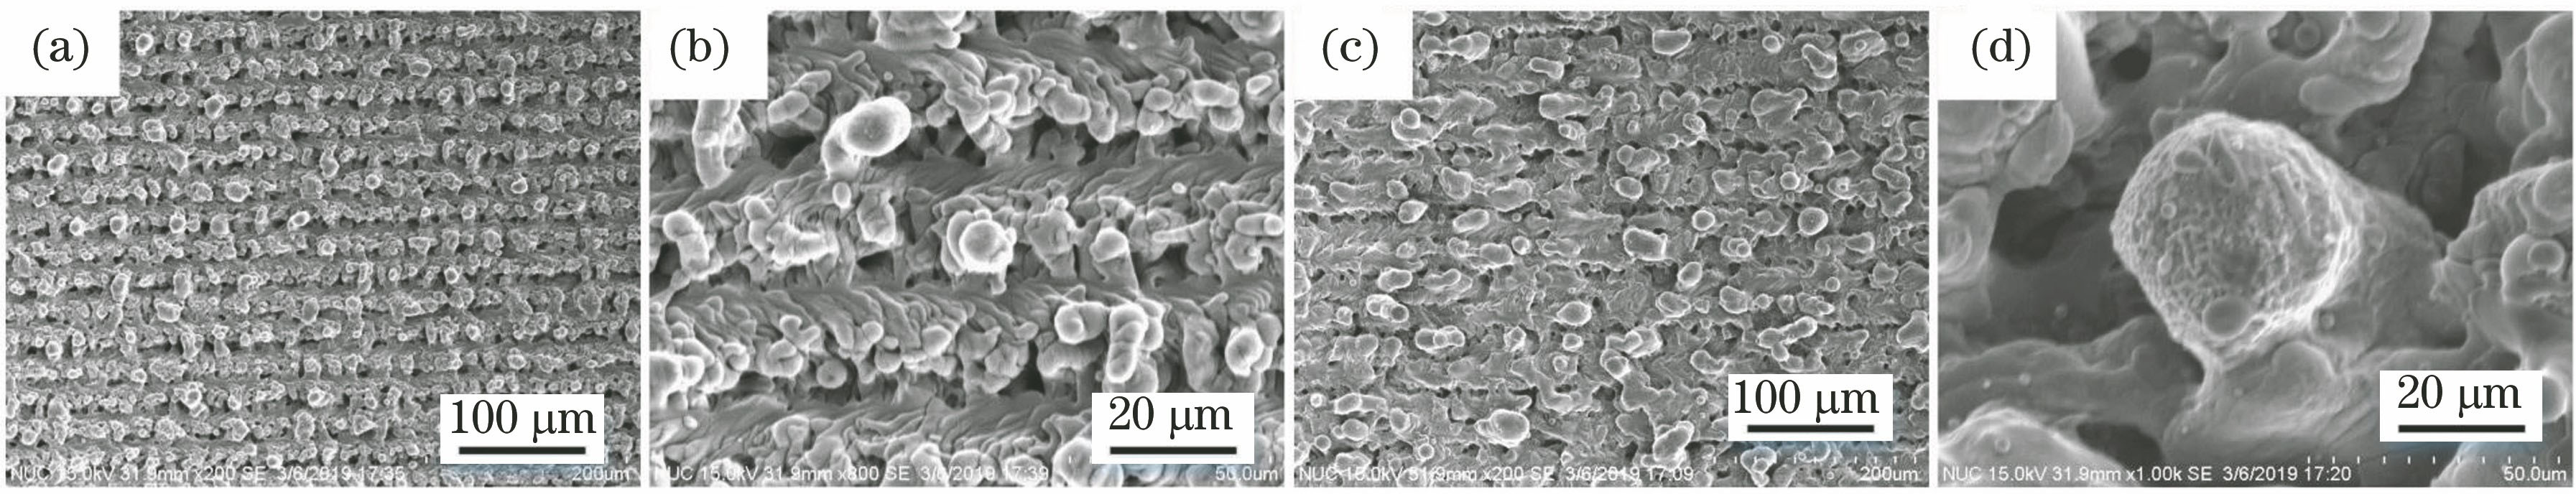 SEM images of superwetting titanium microstructures fabricated by fiber laser ablation with line spacing of 0.03 mm. (a)(b) Pulse power is 12 W;(c)(d) pulse power is 16 W